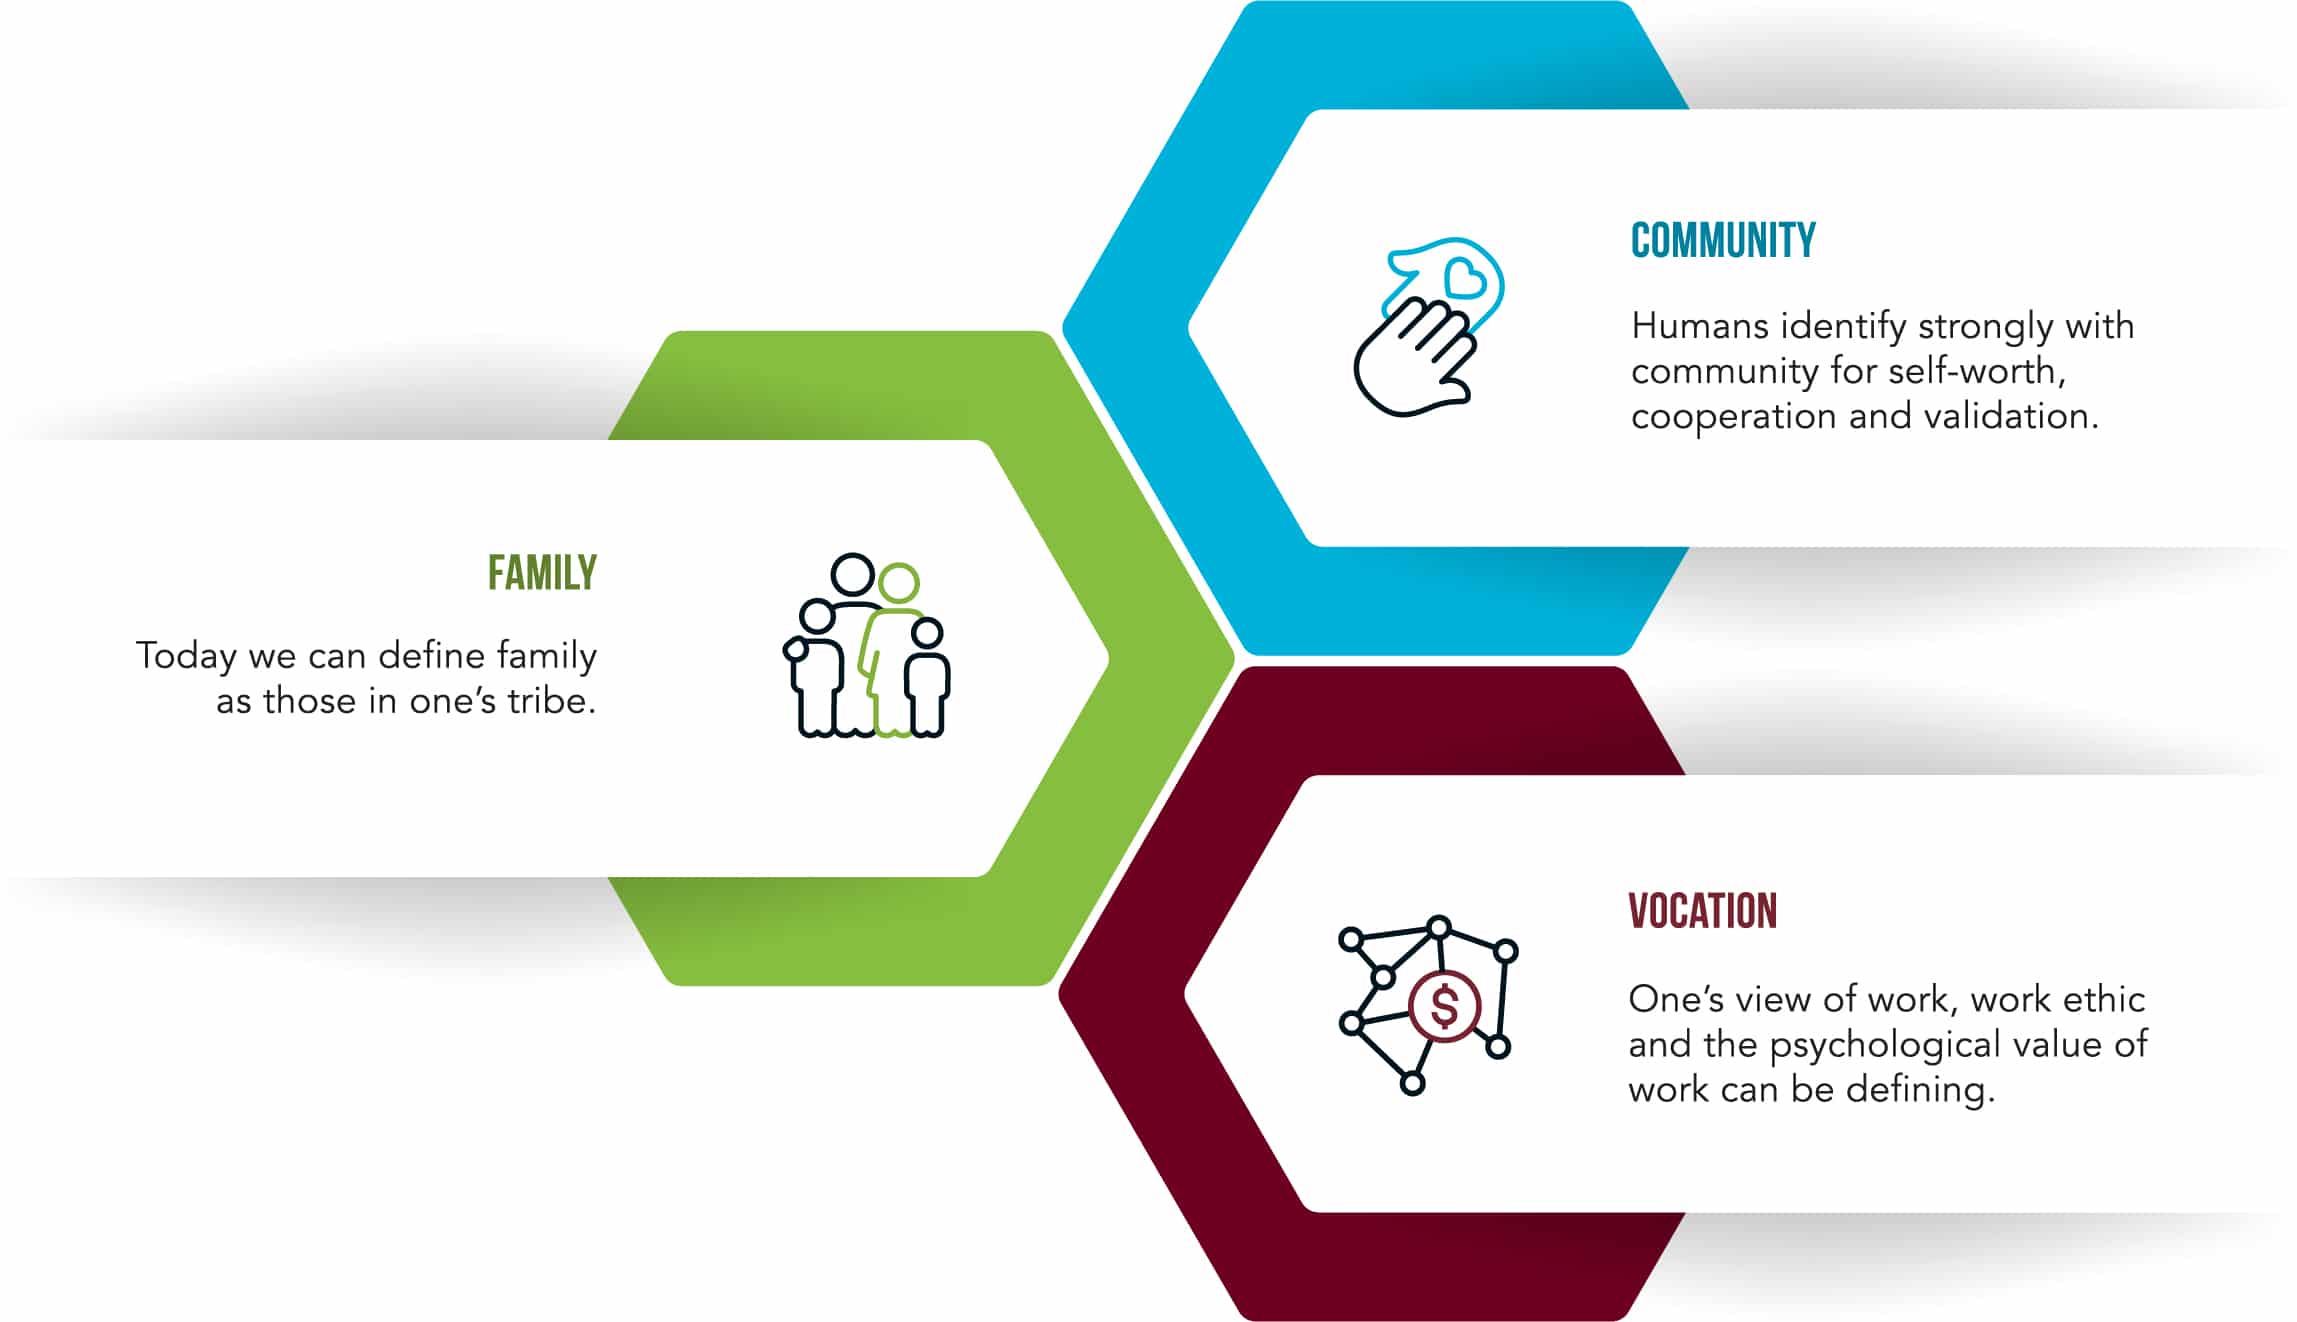 Infographic: Family: Today we can define family as those in one's tribe; Community: Humans identify strongly with community for self-worth, cooperation and validation; Vocation: One's view of work, work ethic and the psychological value of work can be defining